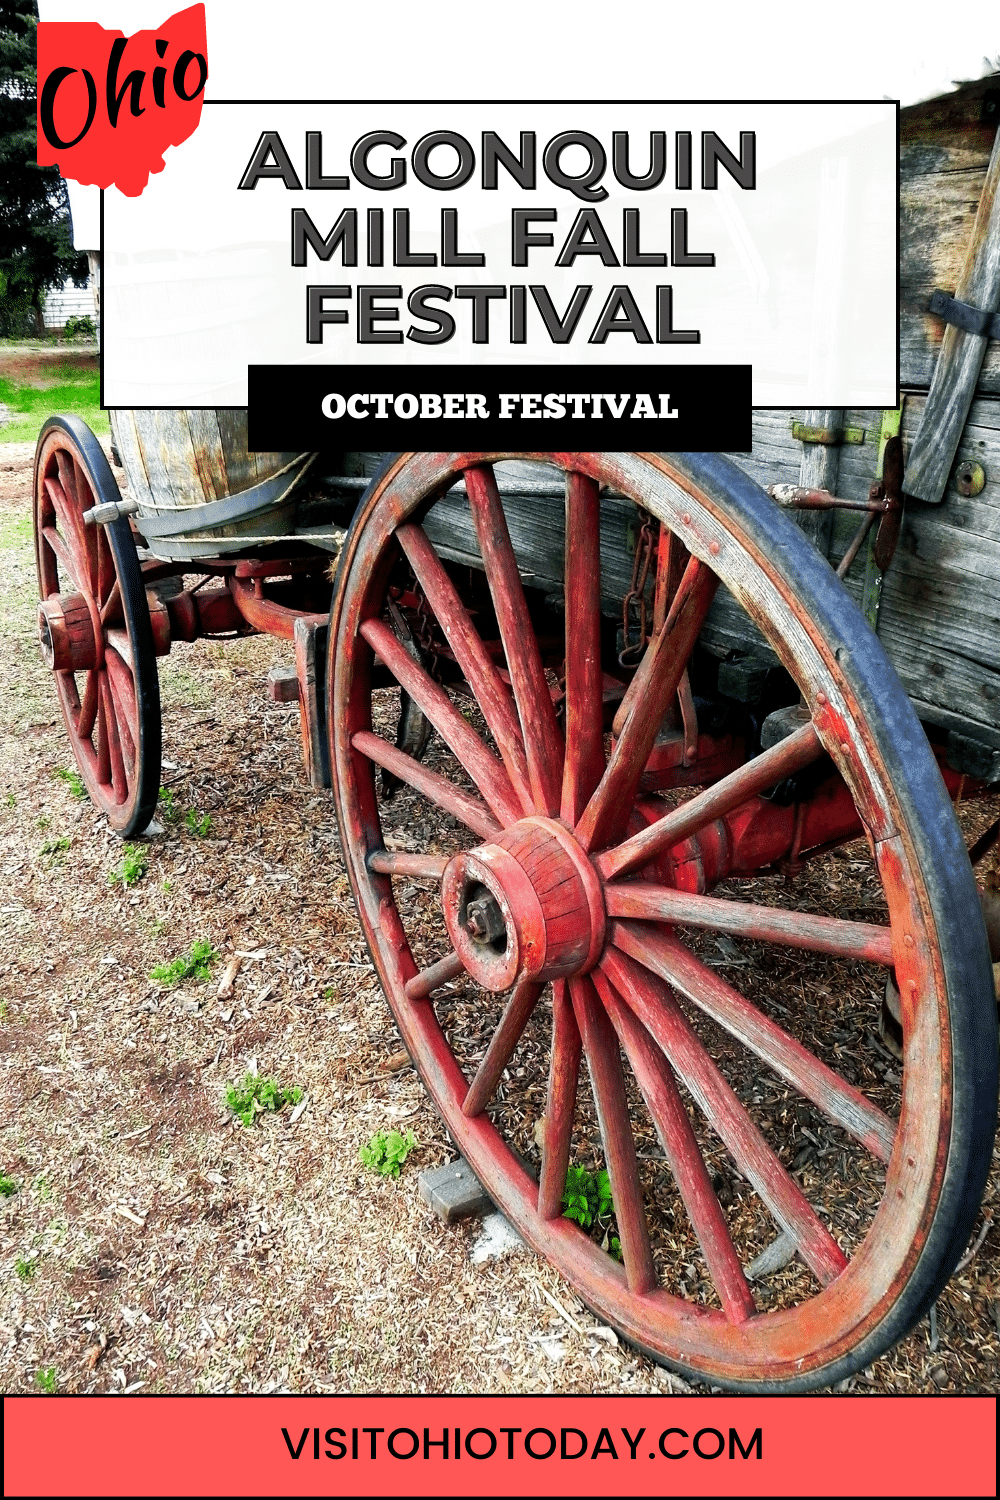 This festival is on the weekend of October 13-15, 2023 at Carrollton. A weekend full of activities and events from the pioneer era, fun for the whole family.